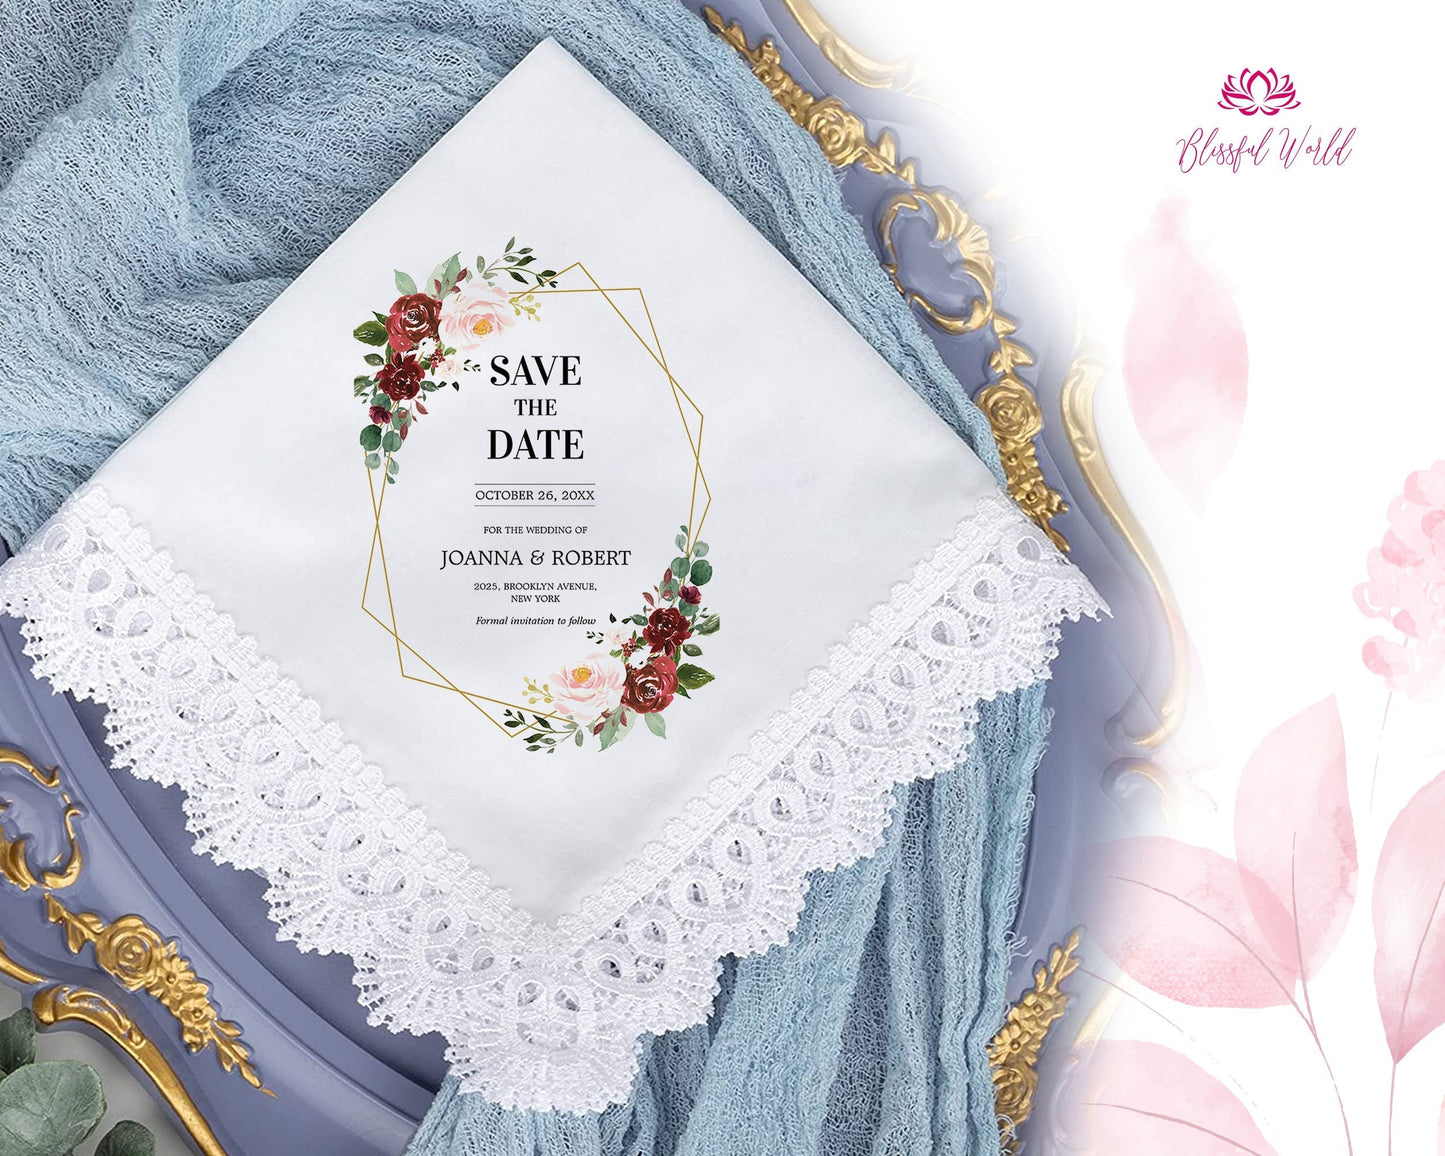 Mother of the Bride gift - Mother of the Bride Handkerchief Wedding Handkerchief.Bridal handkerchief-Mother gift-Boho weddings-Mom Gift